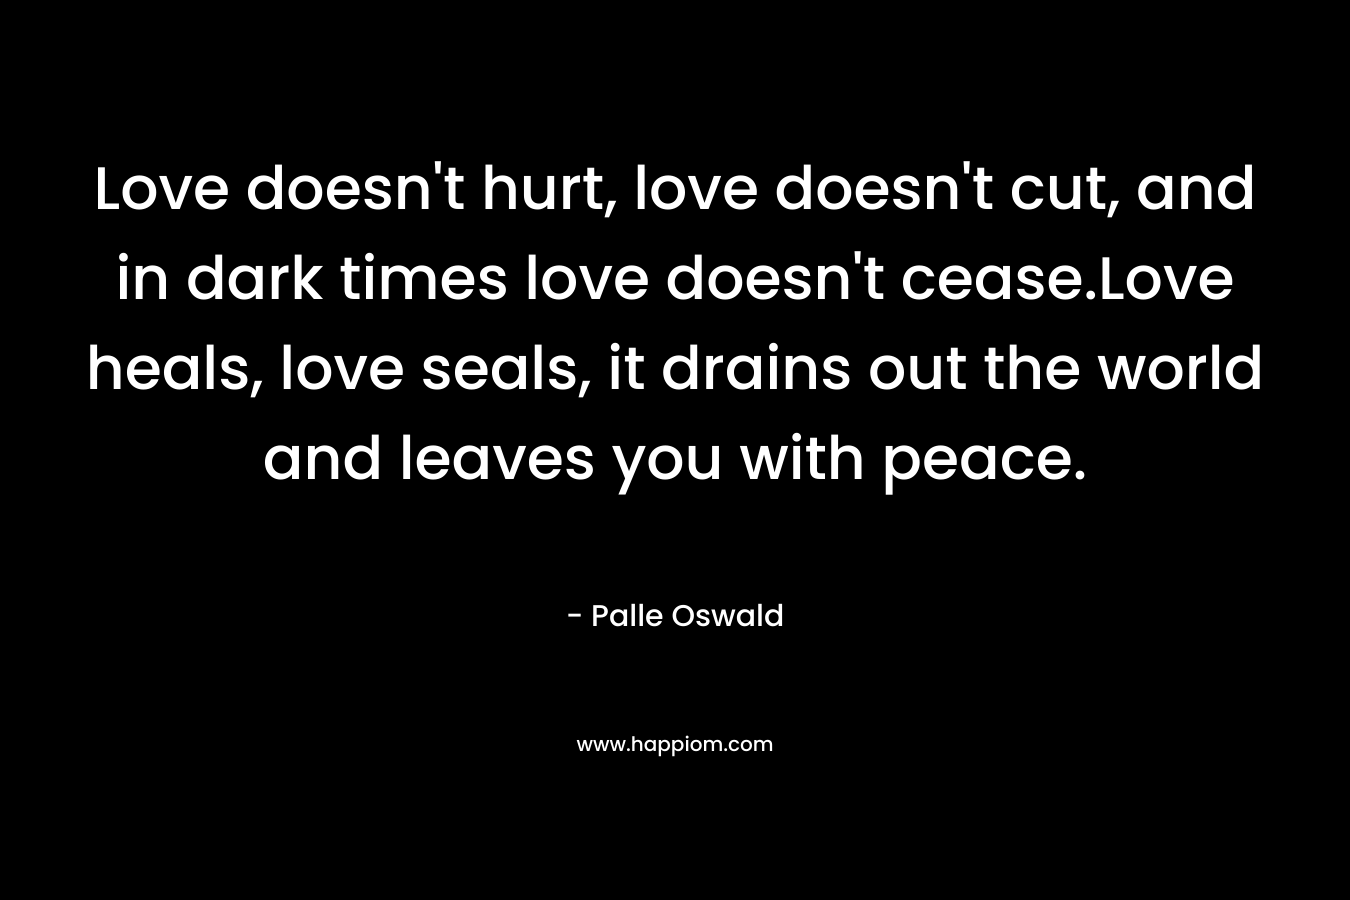 Love doesn’t hurt, love doesn’t cut, and in dark times love doesn’t cease.Love heals, love seals, it drains out the world and leaves you with peace. – Palle Oswald